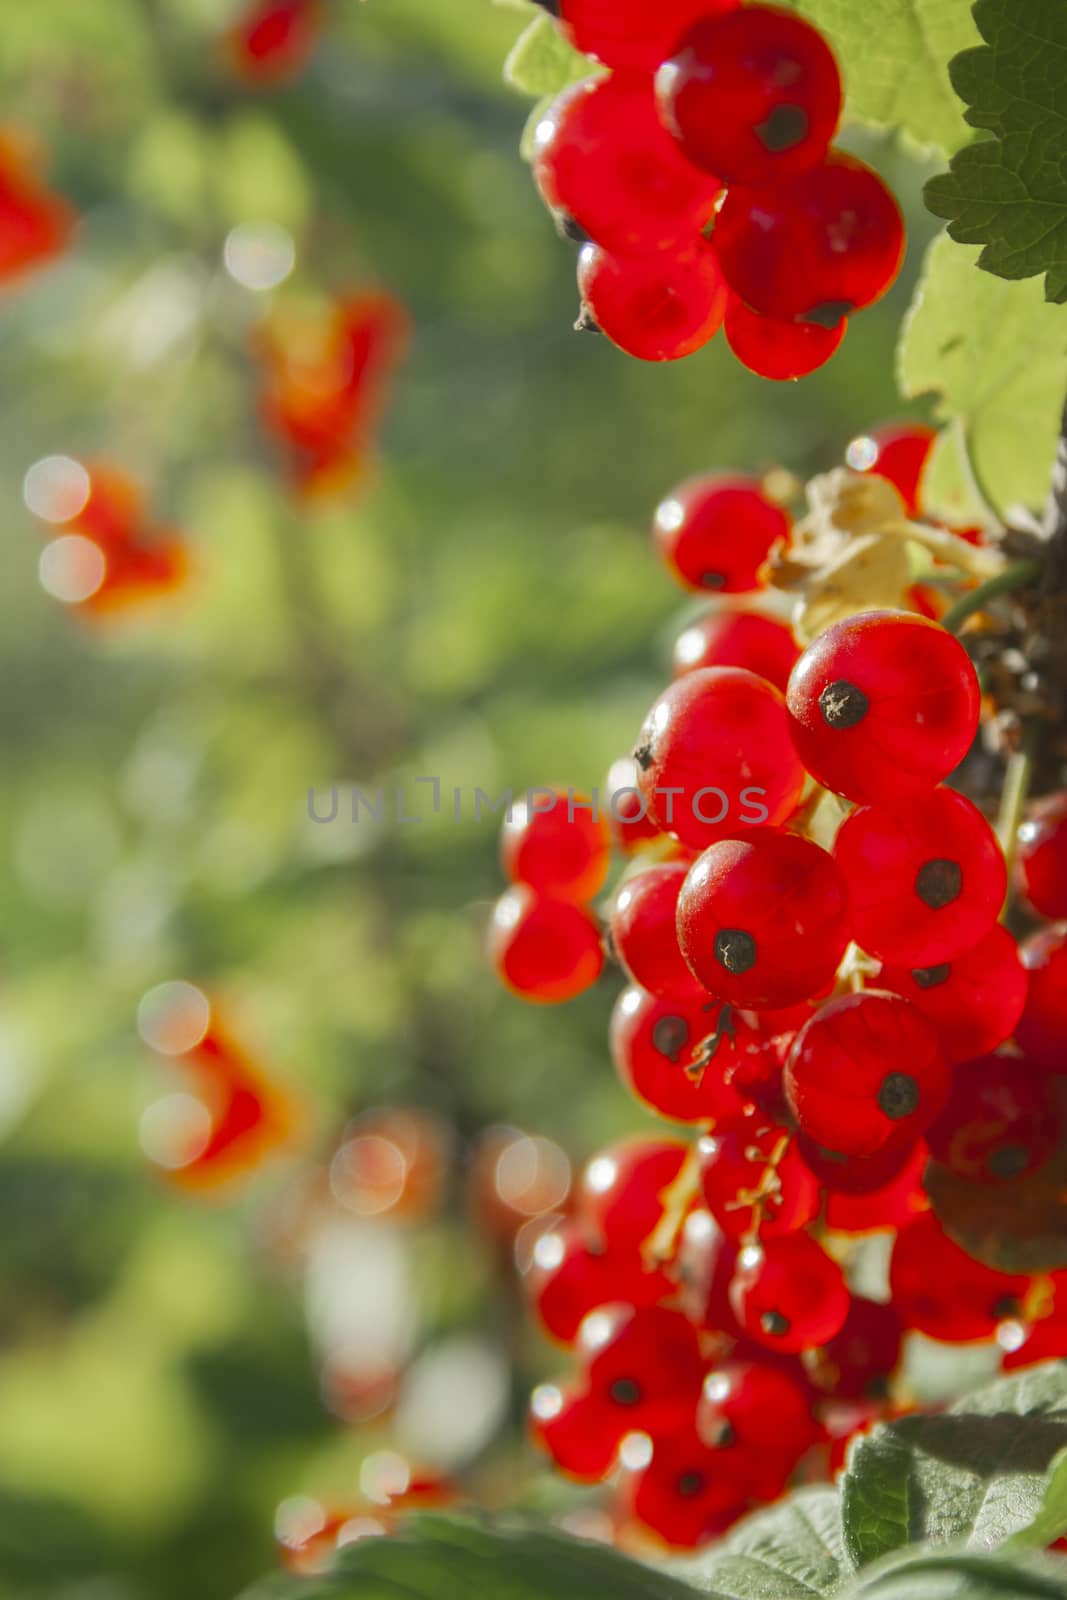 Red ripe juicy currant on the green branch at sunny day close up. Red currant bunch on sunlight. Redcurrant berries ribes rubrum. Berries of asia, europe and north america vertical